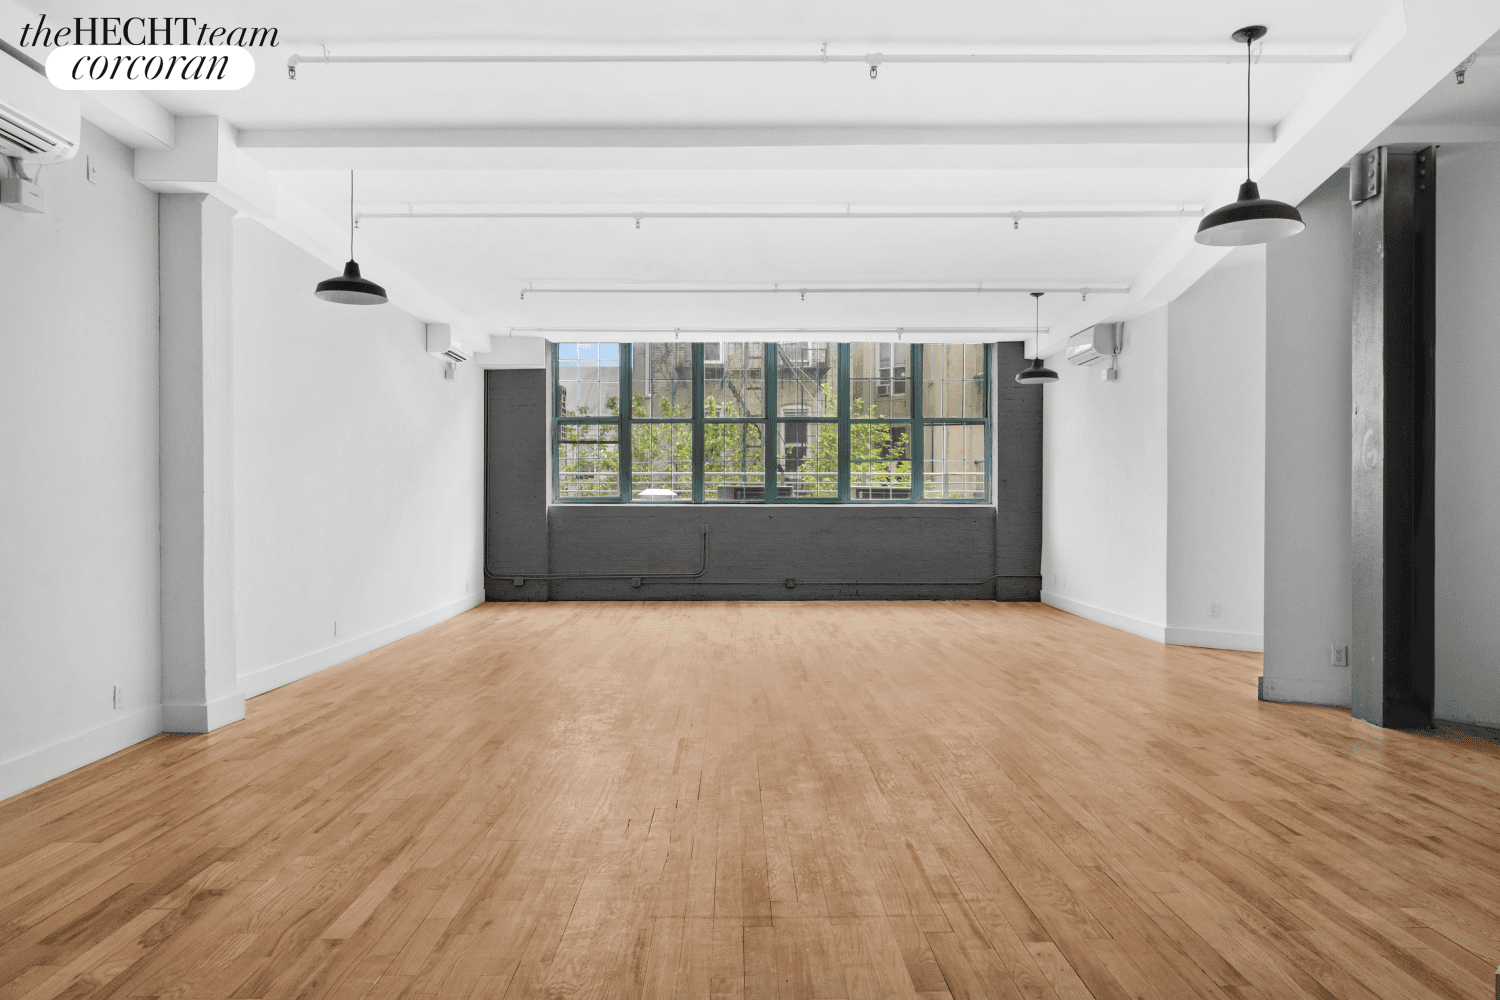 First Open House Sunday, May 19th 12 00 pm 1 30 pmExperience loft living at its finest in the heart of Greenpoint, Brooklyn.